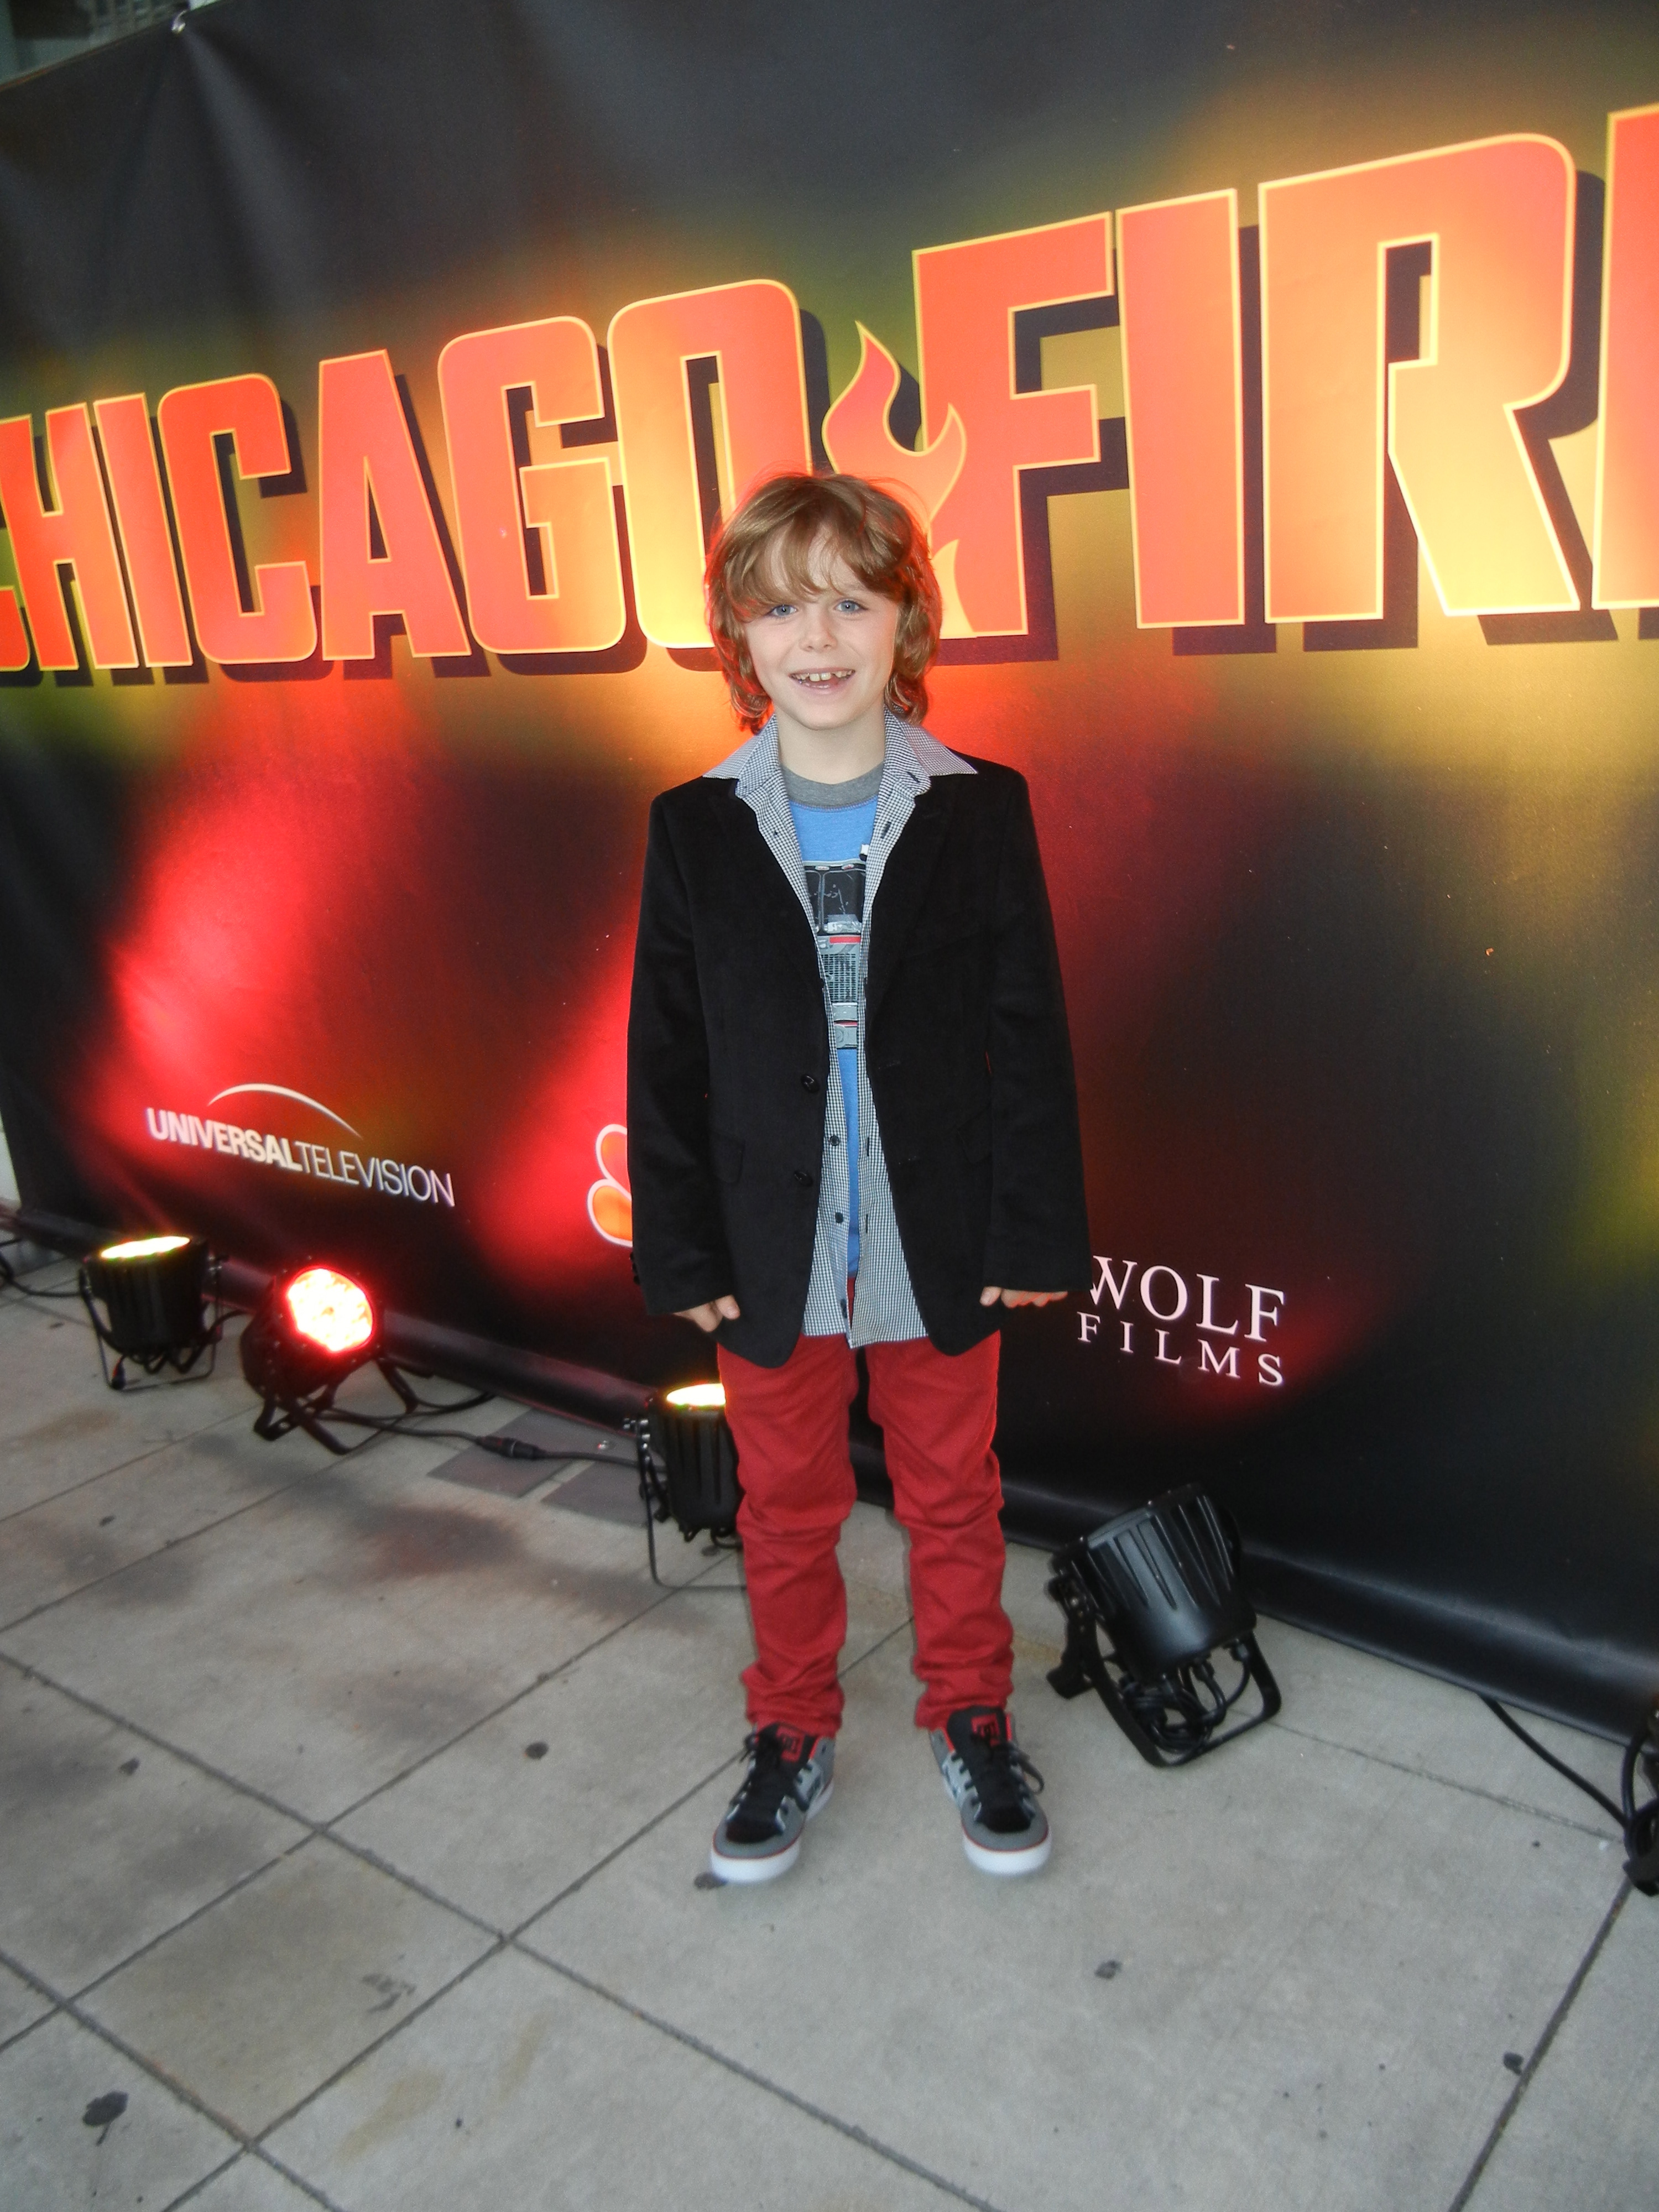 Griffin Kane at the Chicago Fire Premiere, 2012